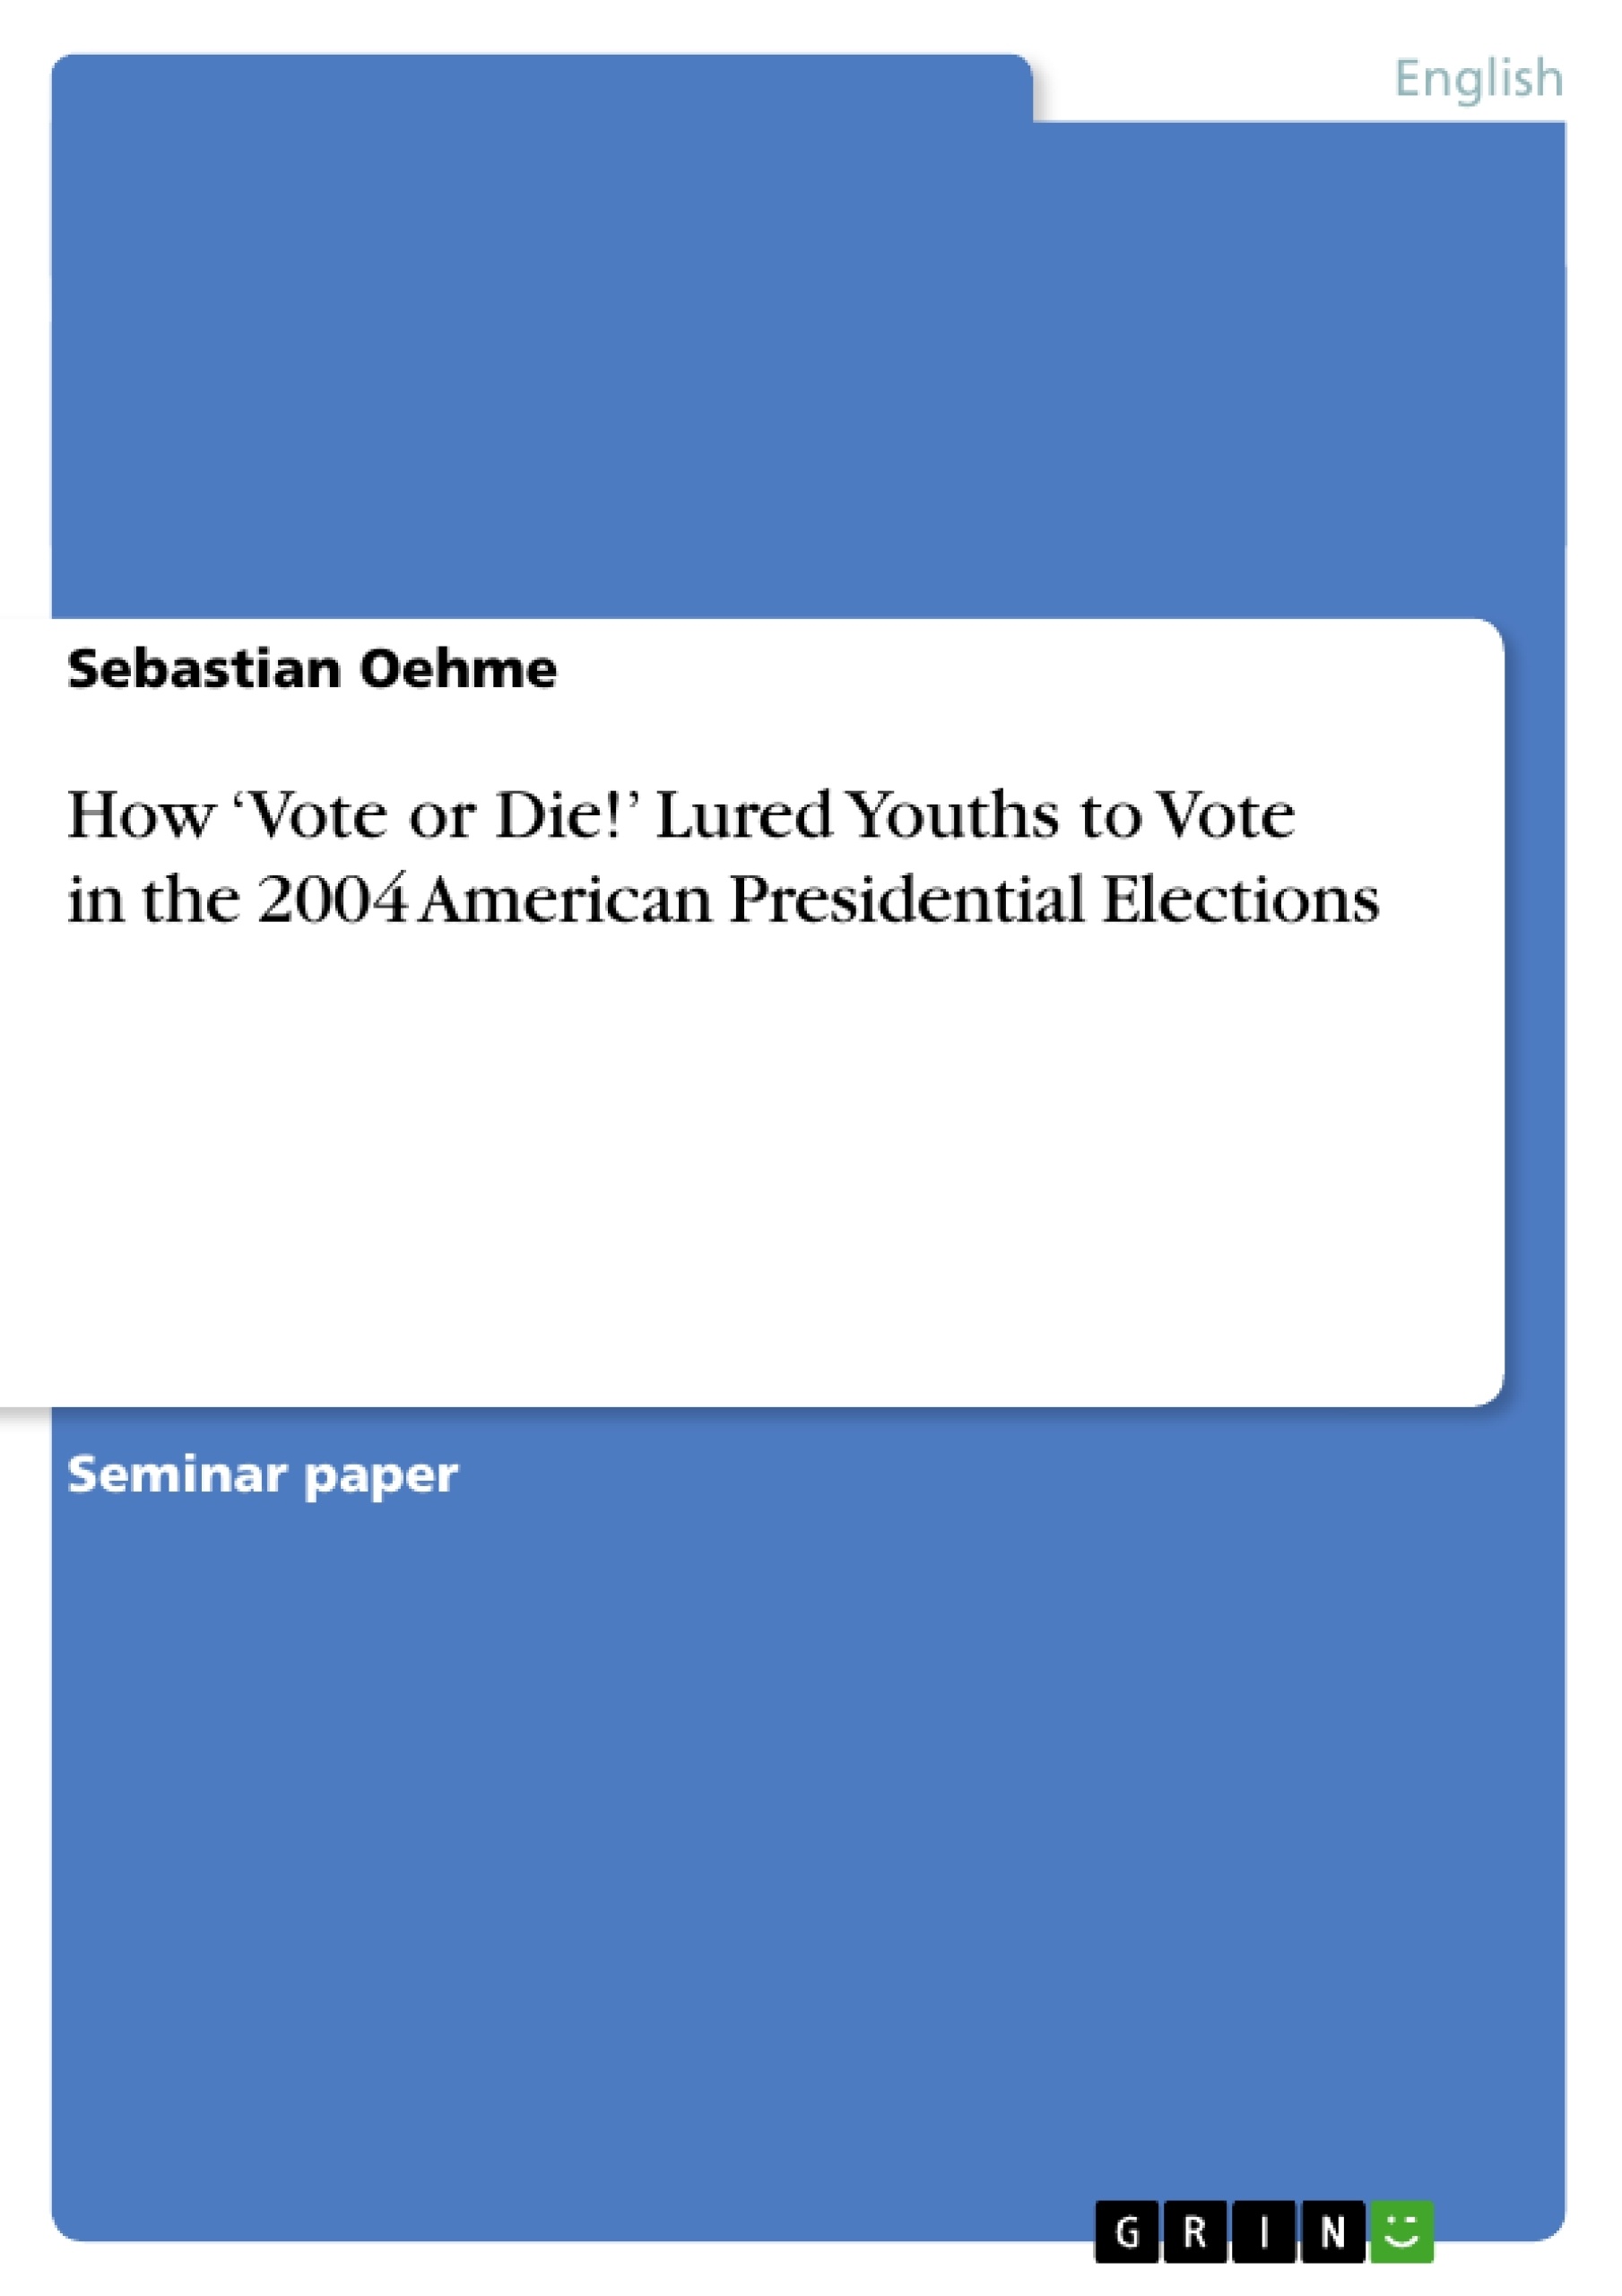 Titre: How ‘Vote or Die!’ Lured Youths to Vote in the 2004 American Presidential Elections